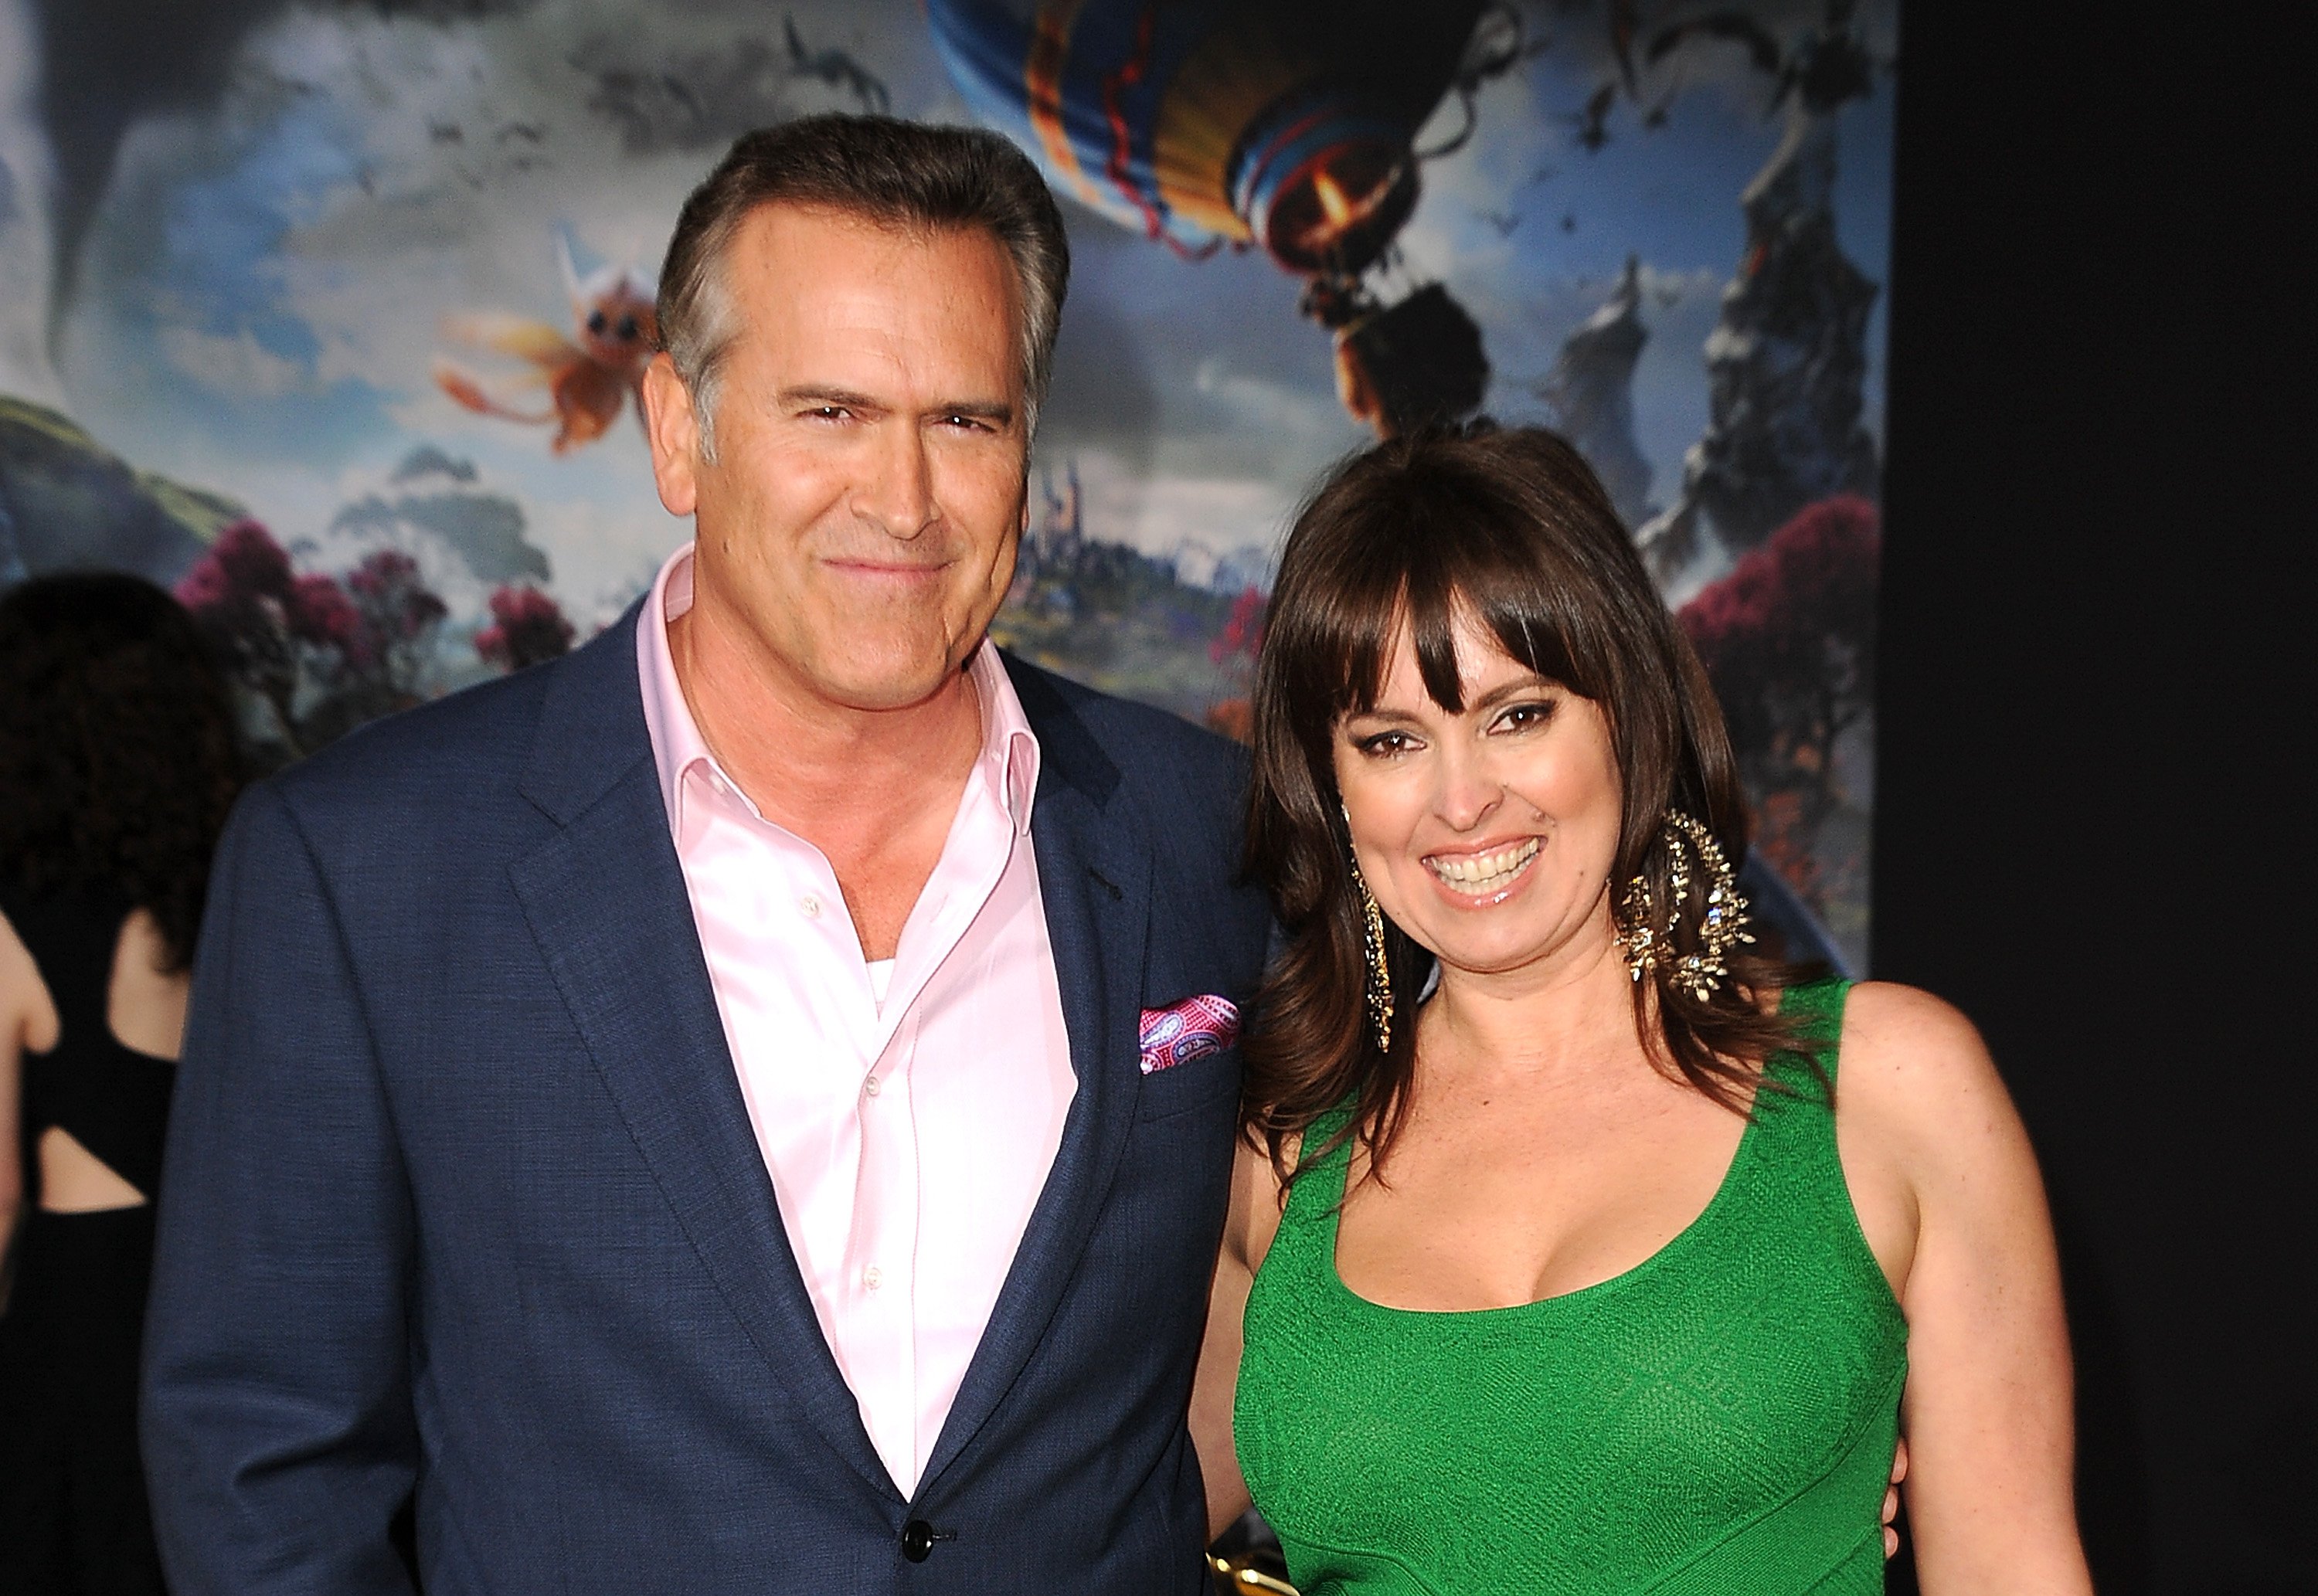 Bruce Campbell and Ida Gearon during the world premiere of Disney's "OZ The Great And Powerful" at the El Capitan Theatre on February 13, 2013, in Hollywood, California. | Source: Getty Images